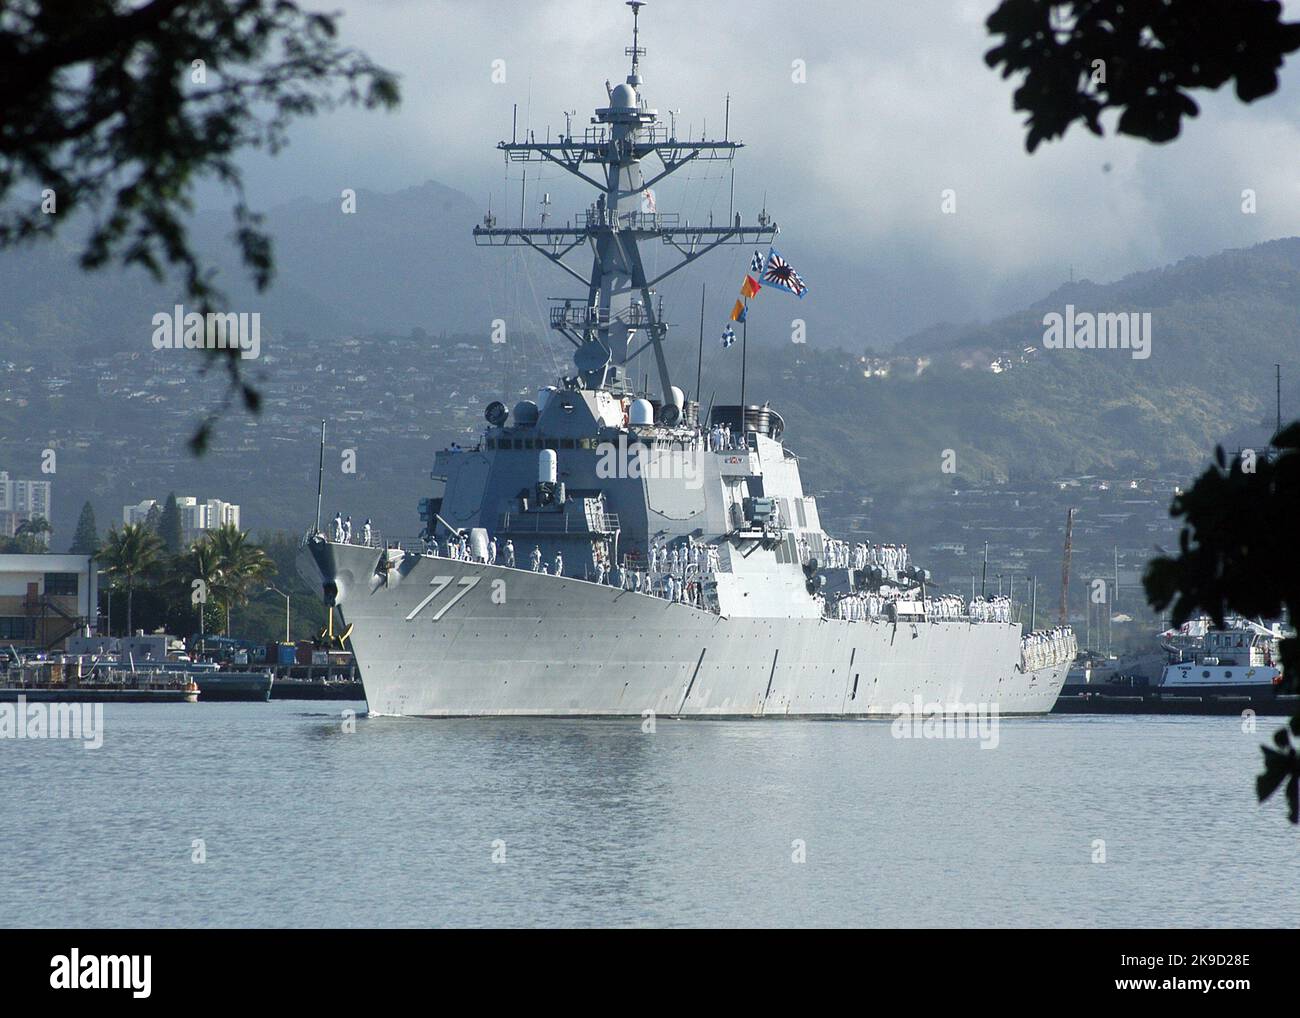 Arleigh Burke-class guided missile destroyer USS O’Kane (DDG 77) U.S. Navy Stock Photo